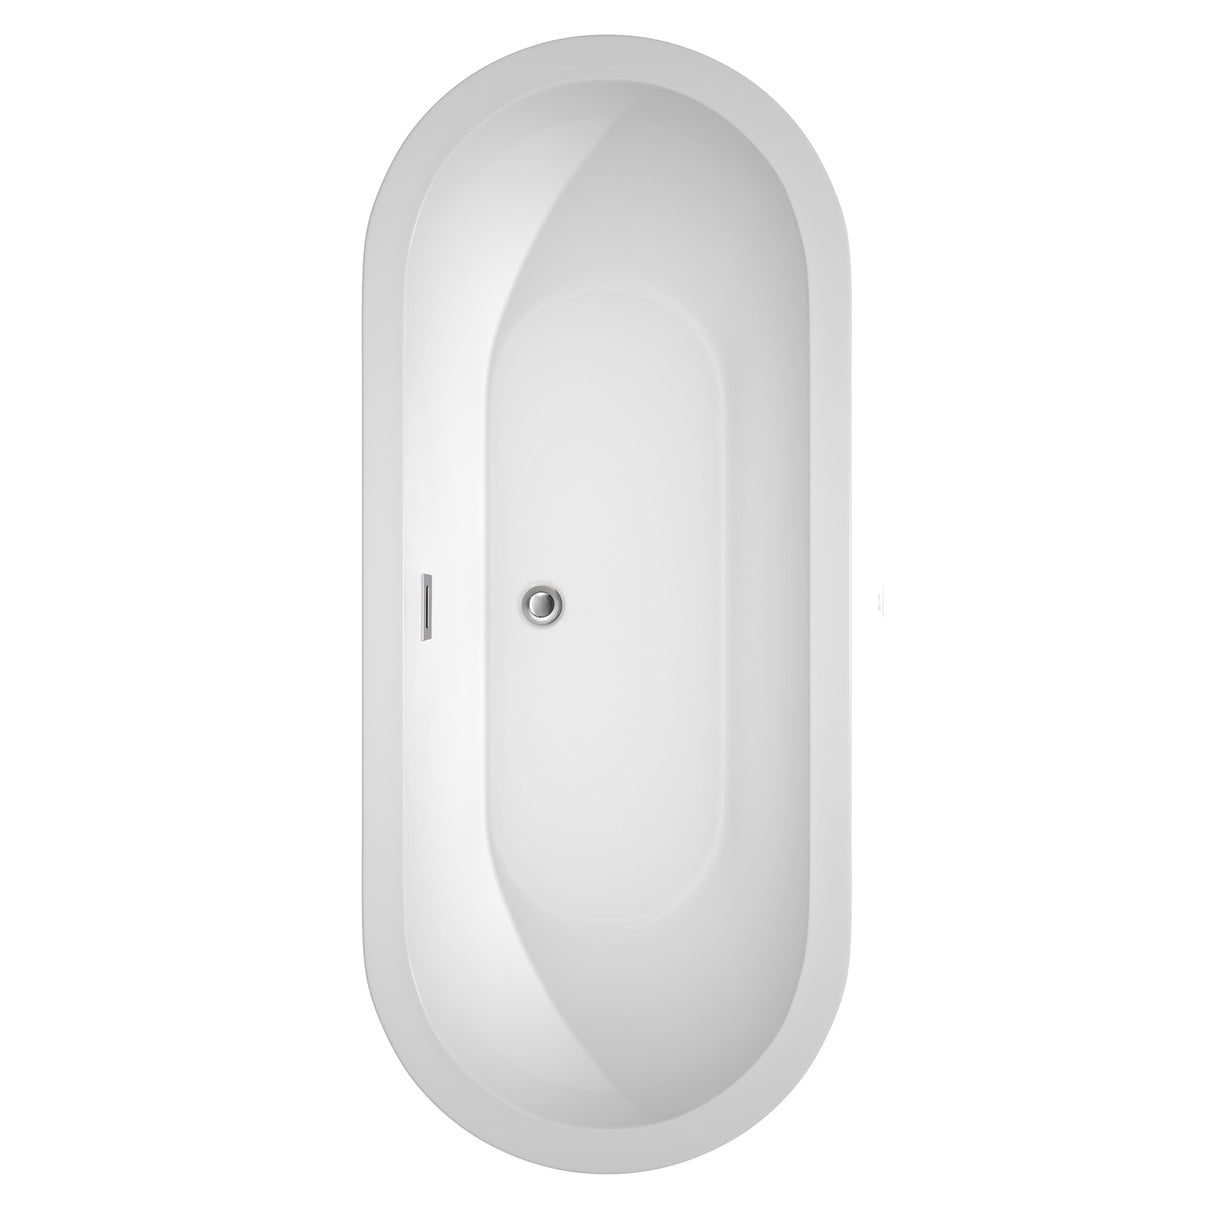 Soho 72 Inch Freestanding Bathtub in White with Polished Chrome Drain and Overflow Trim